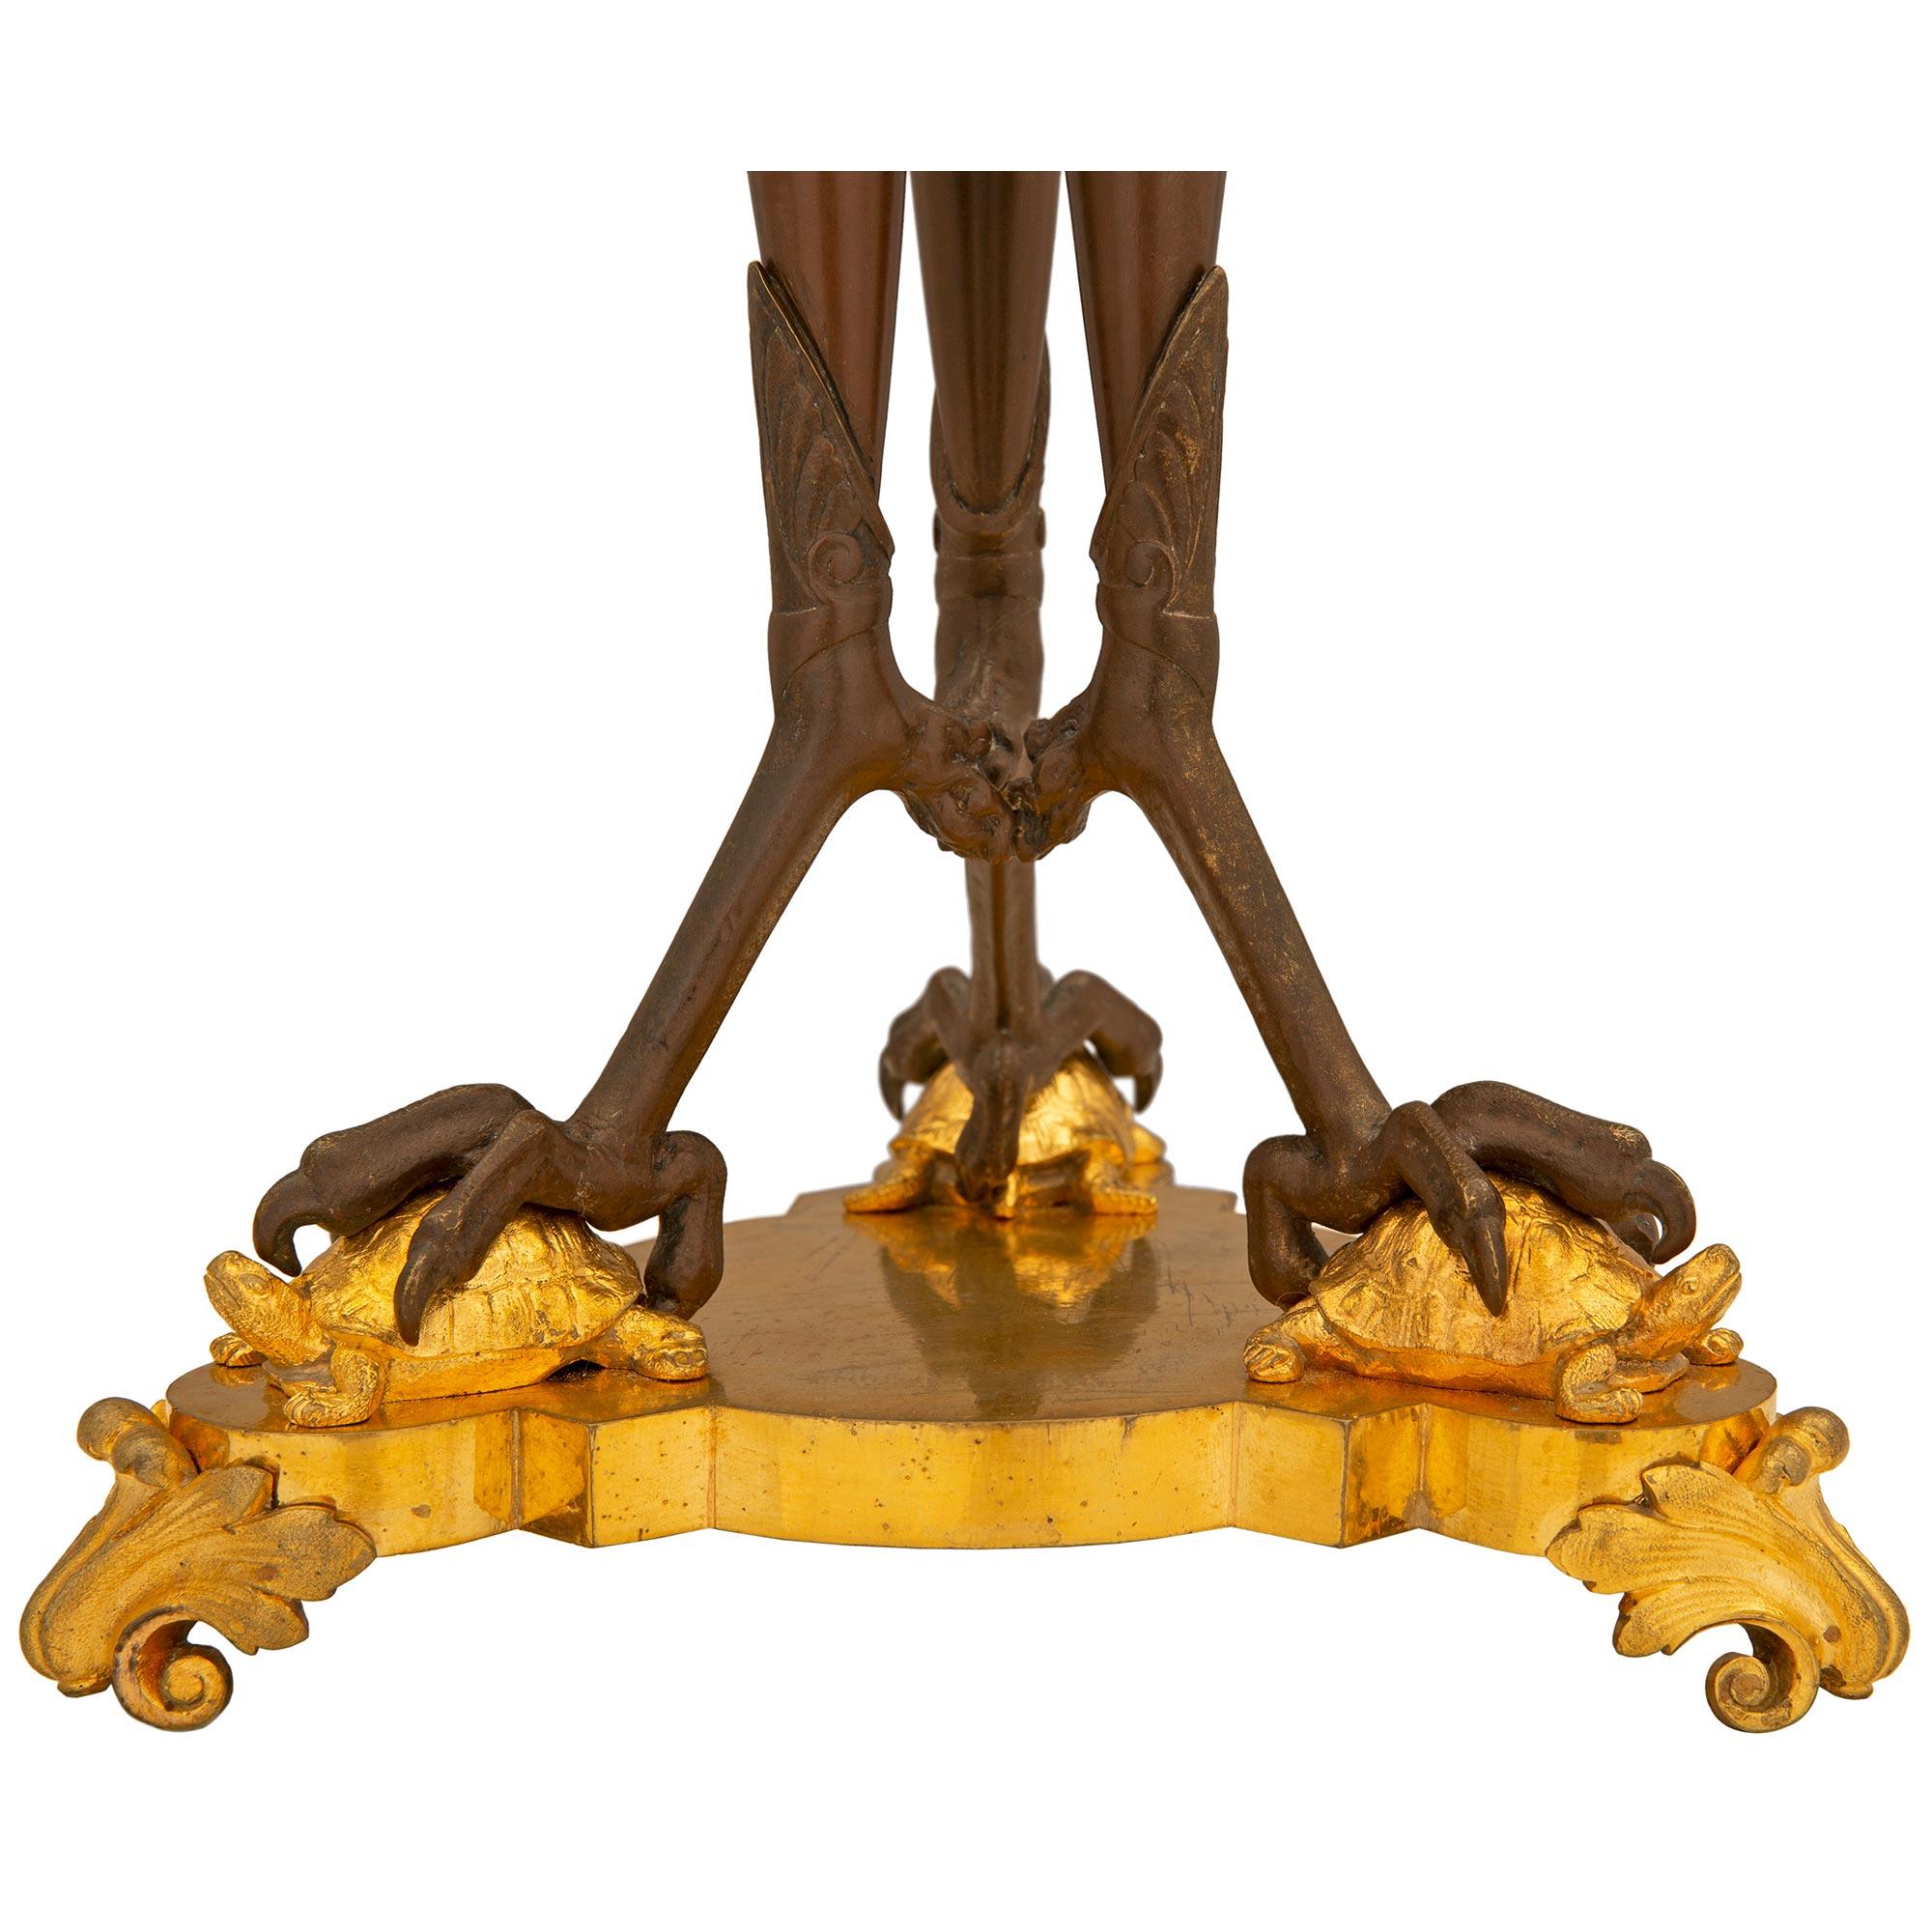 Pair of French 19th Century Neoclassical St. Bronze and Ormolu Candelabras For Sale 4